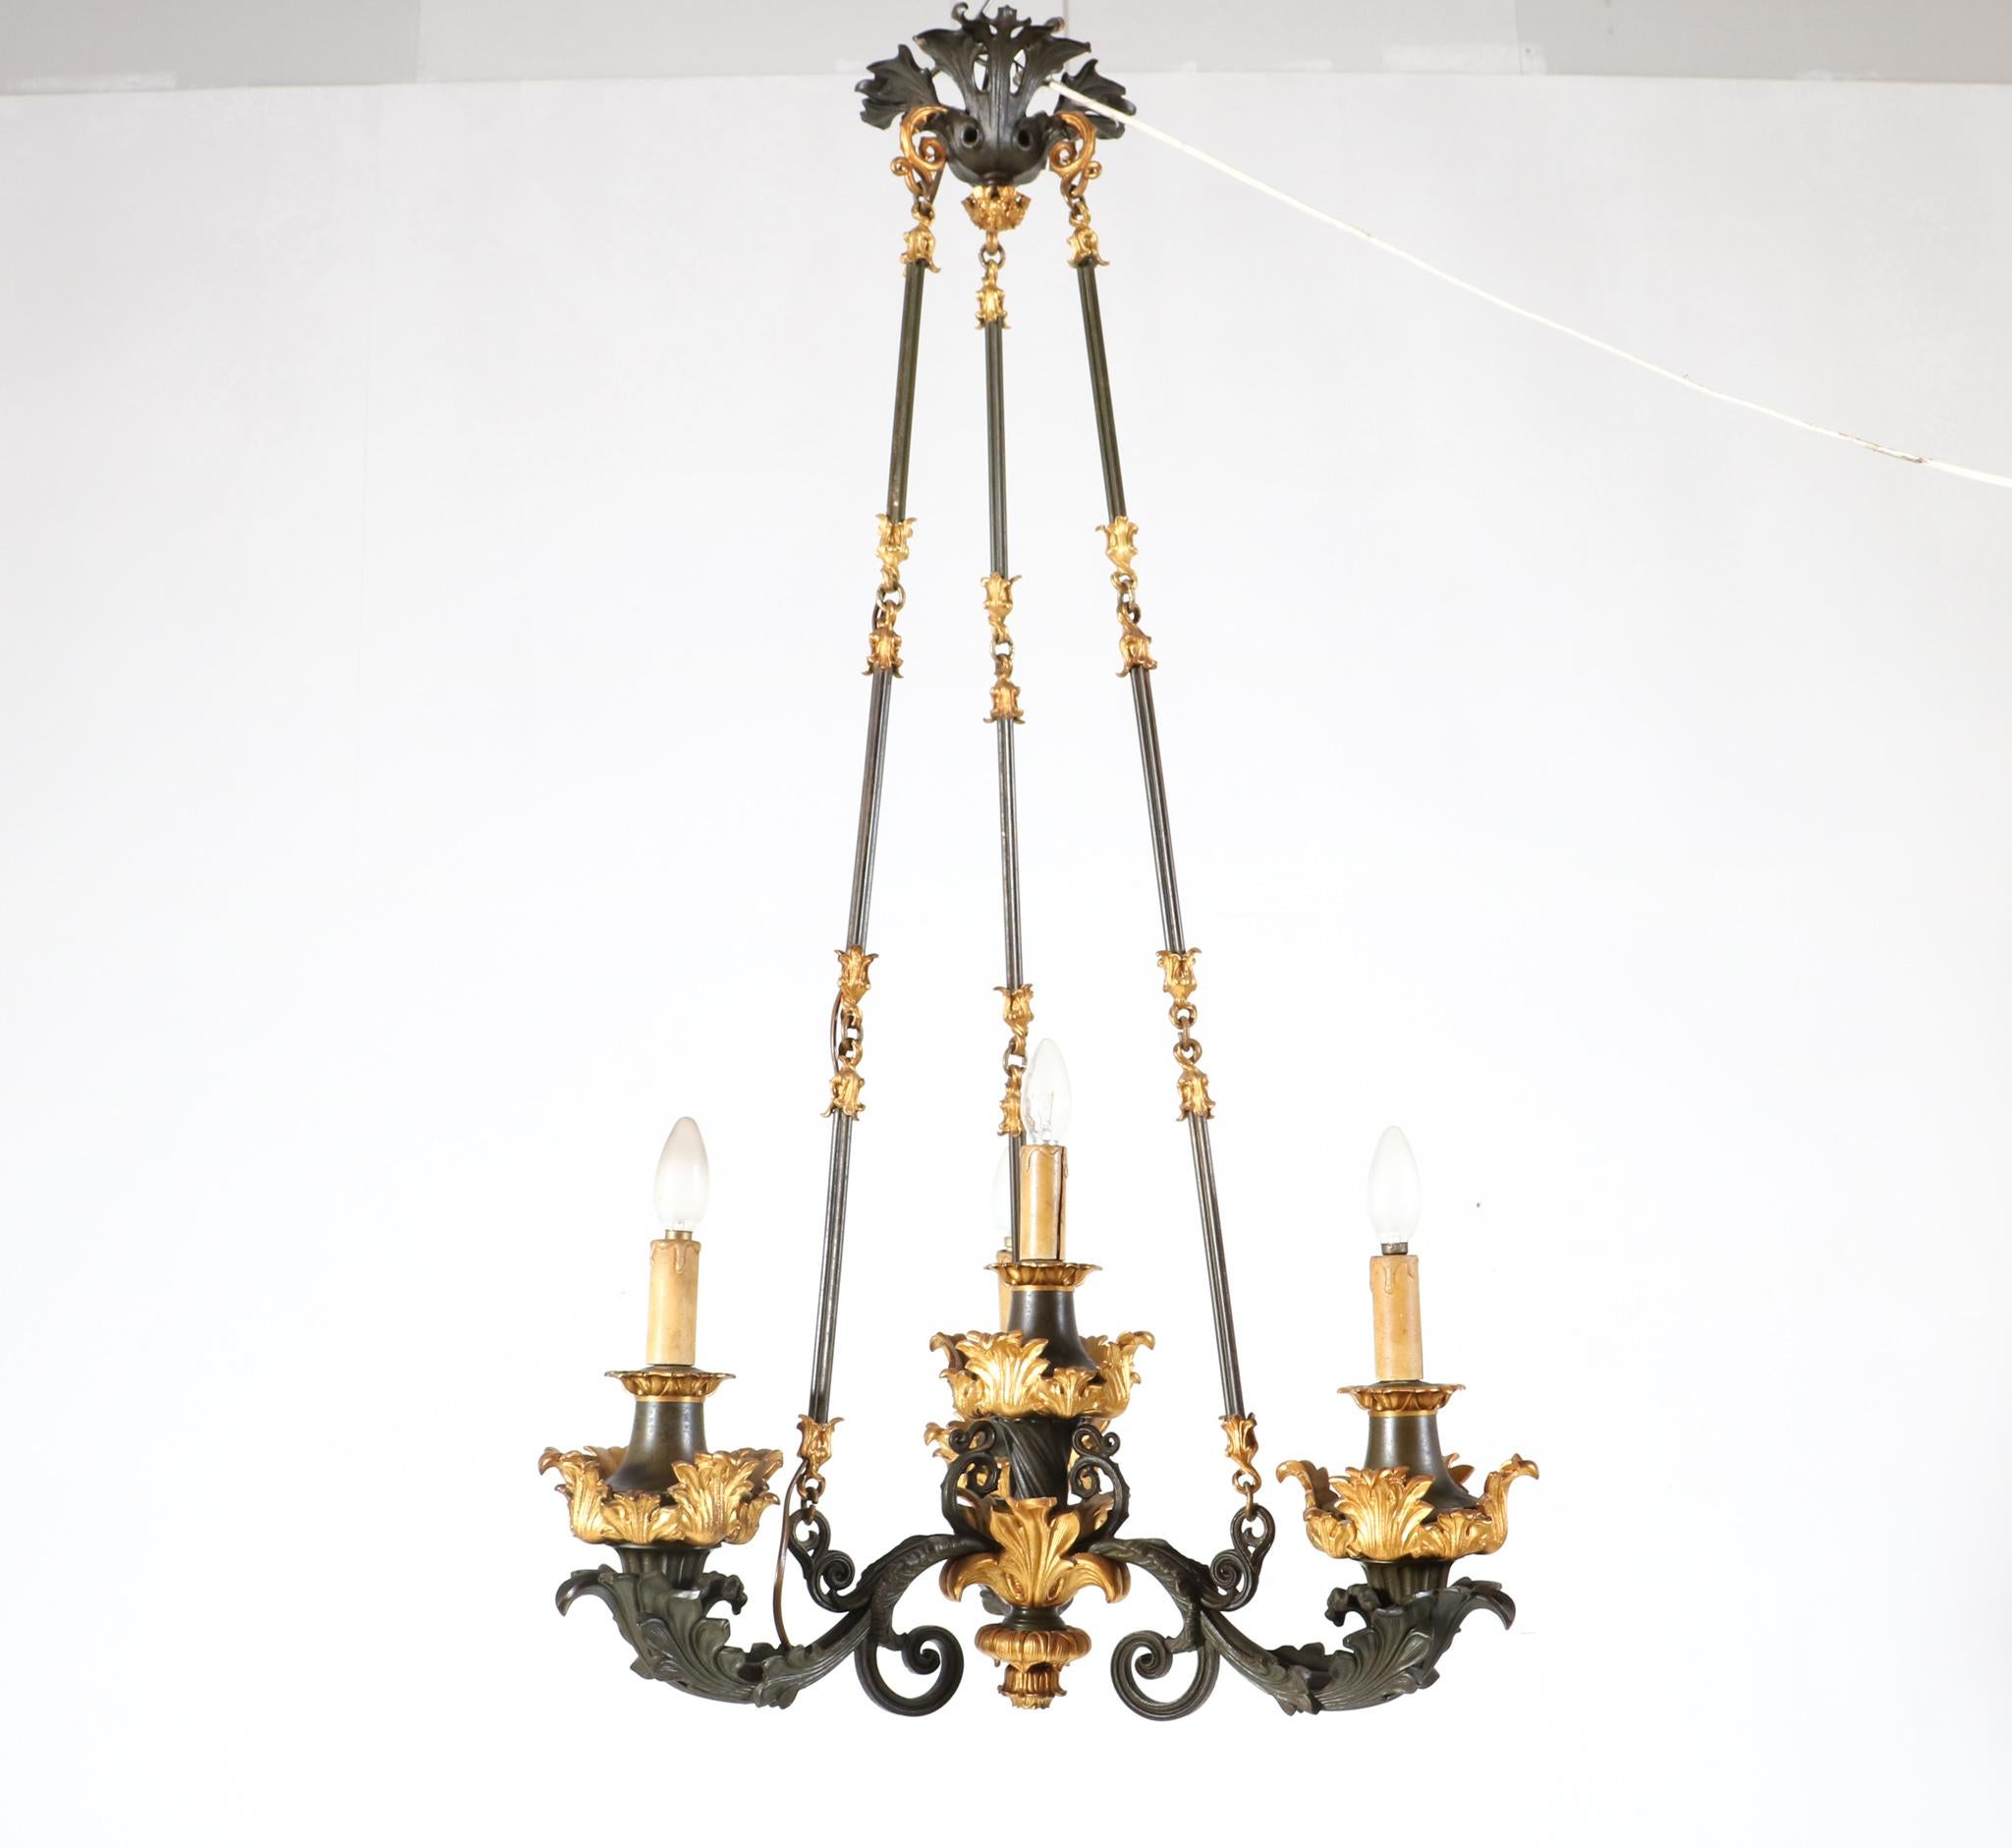 Patinated French 19th Century Empire Ormolu Bronze Four-Light Chandelier